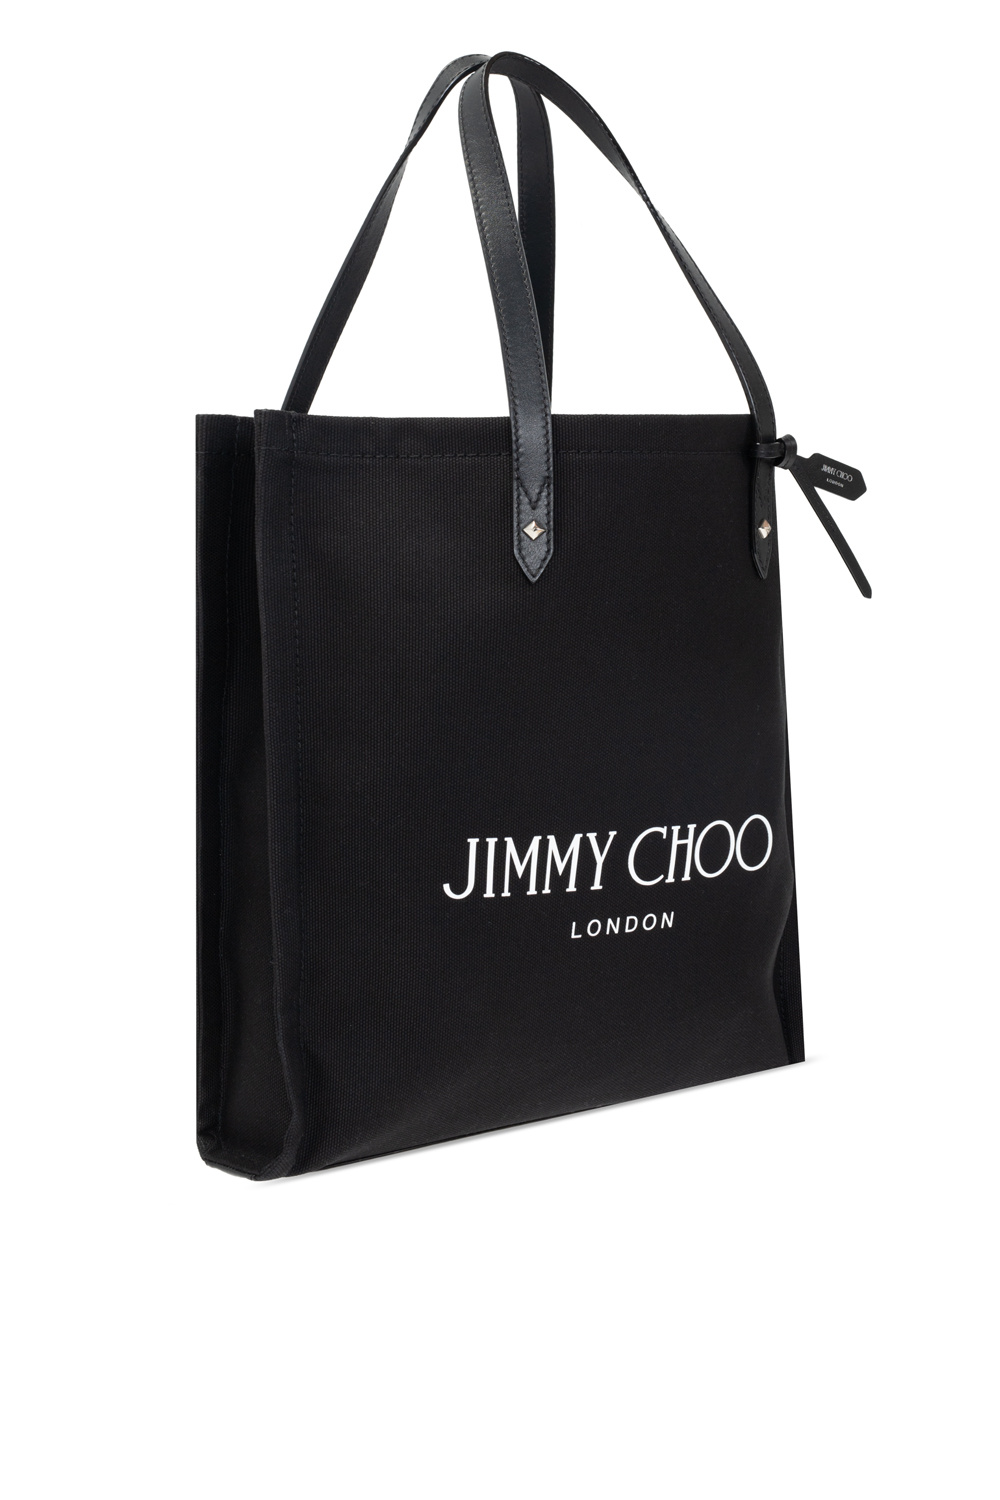 Rue La La - As if you needed an excuse to shop… Jimmy Choo is here with  $499 shoes. Fill your bag.